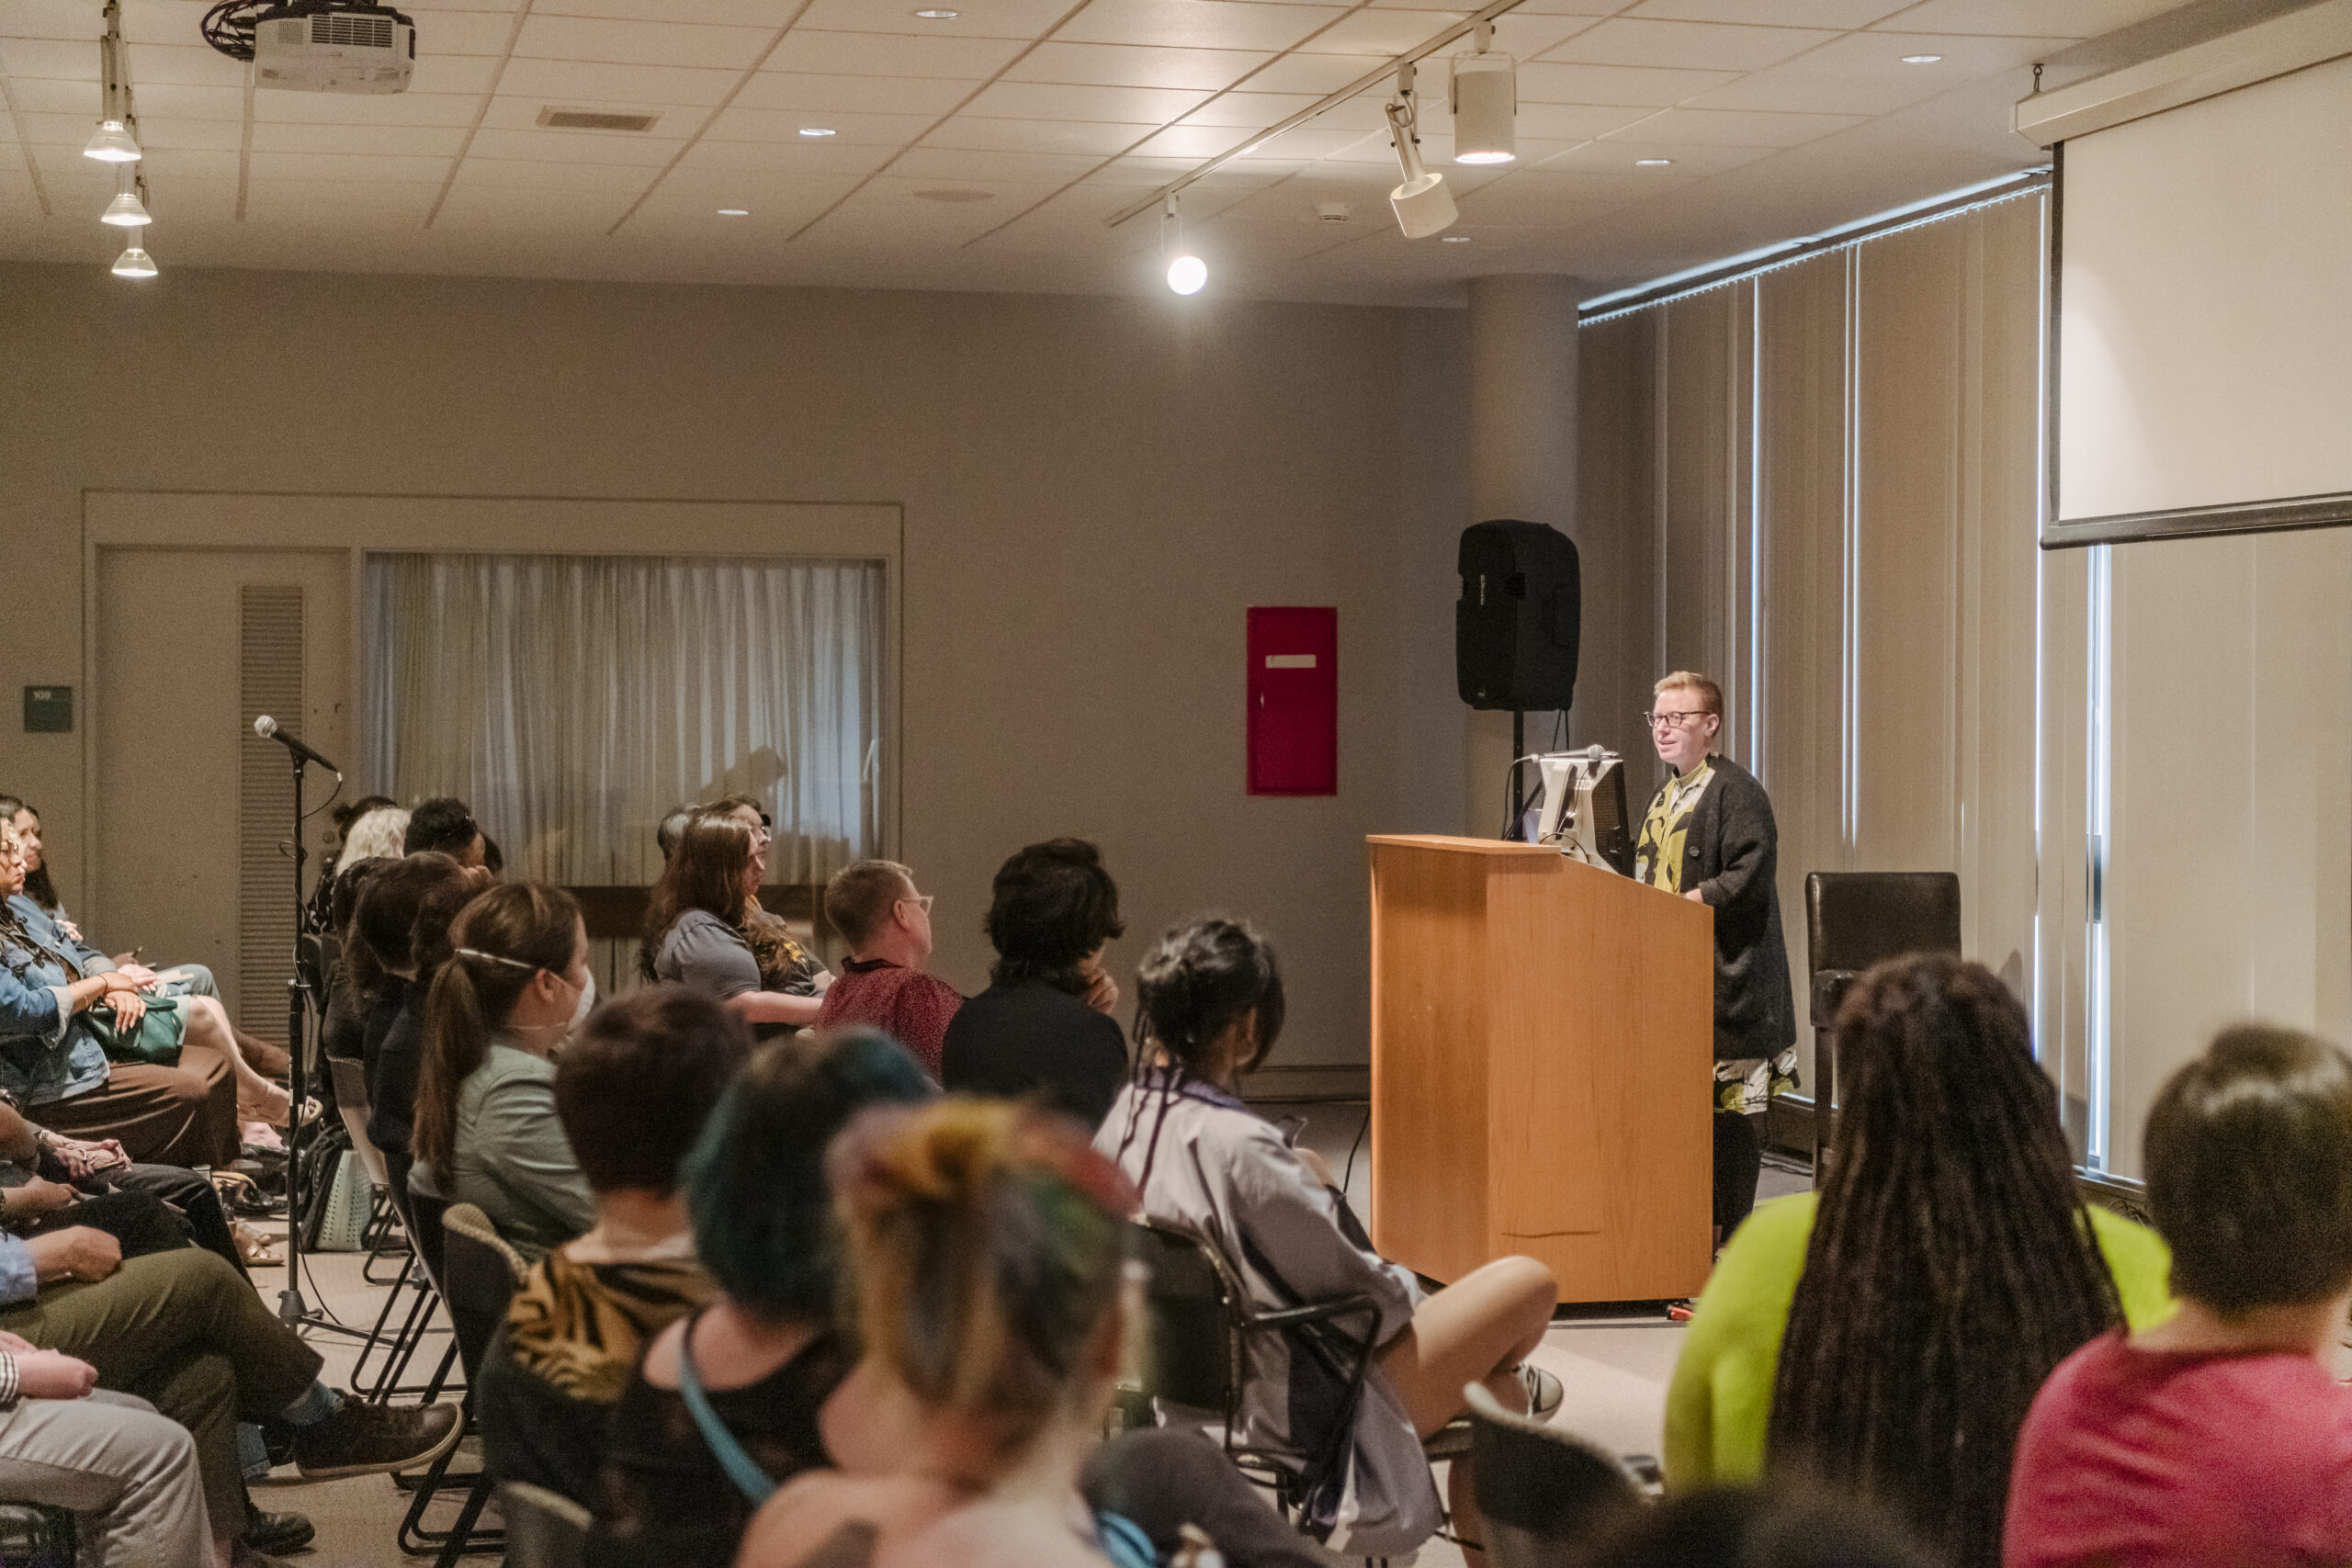 The Mellon Foundation awards UMBC’s Gender, Women’s, and Sexuality Studies department $100,000 as part of its ‘Affirming Multivocal Humanities’ initiative